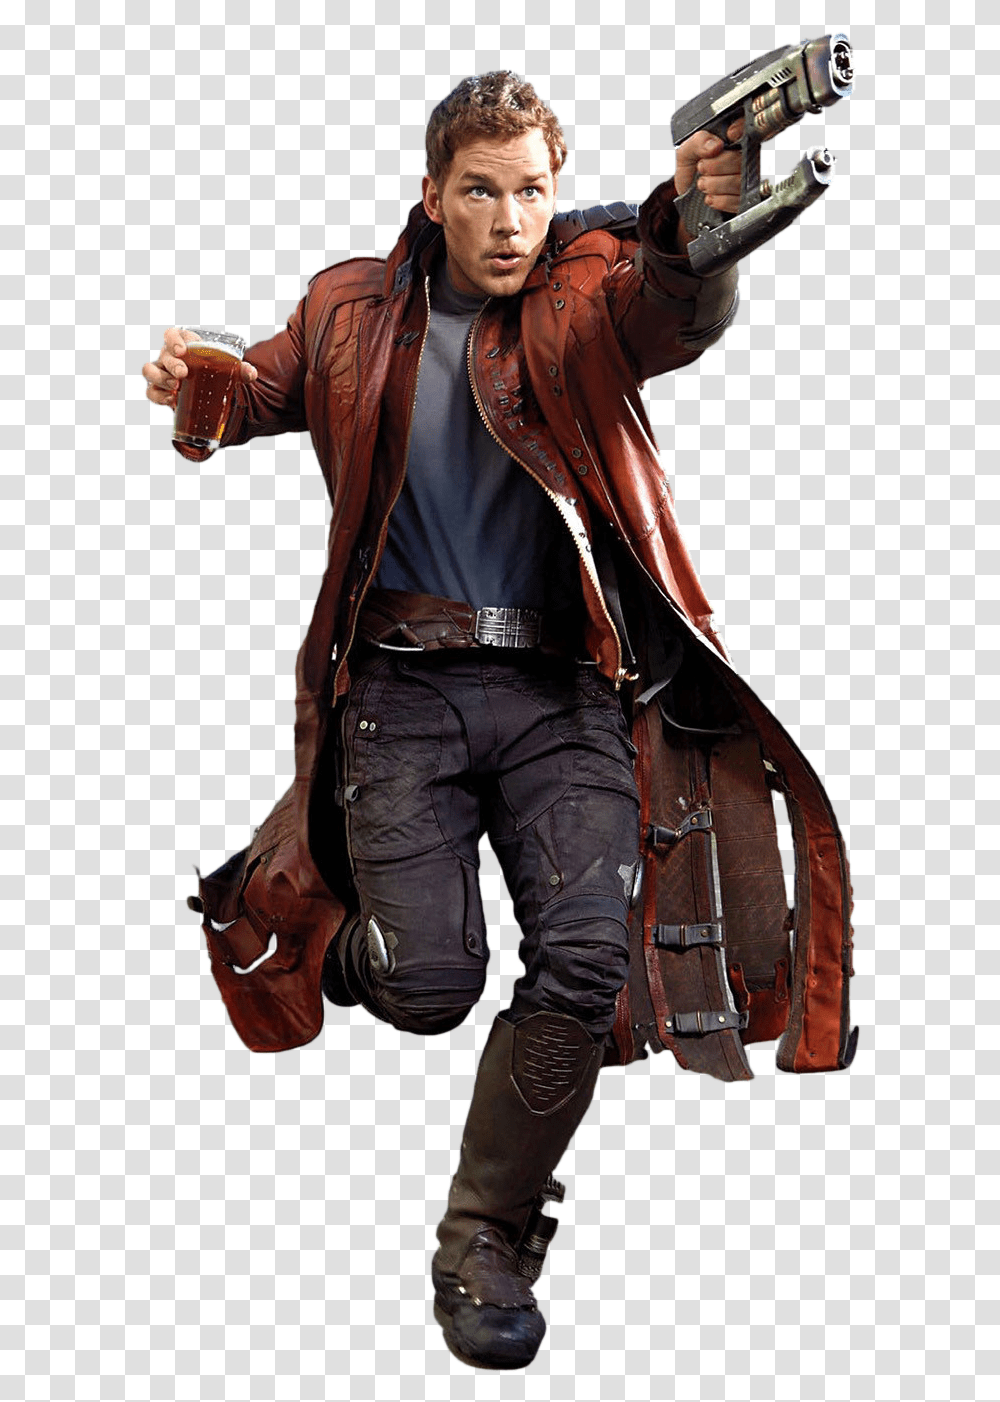 Download Cutout Star Lord Cut Out Full Size Image Star Lord, Clothing, Jacket, Coat, Person Transparent Png